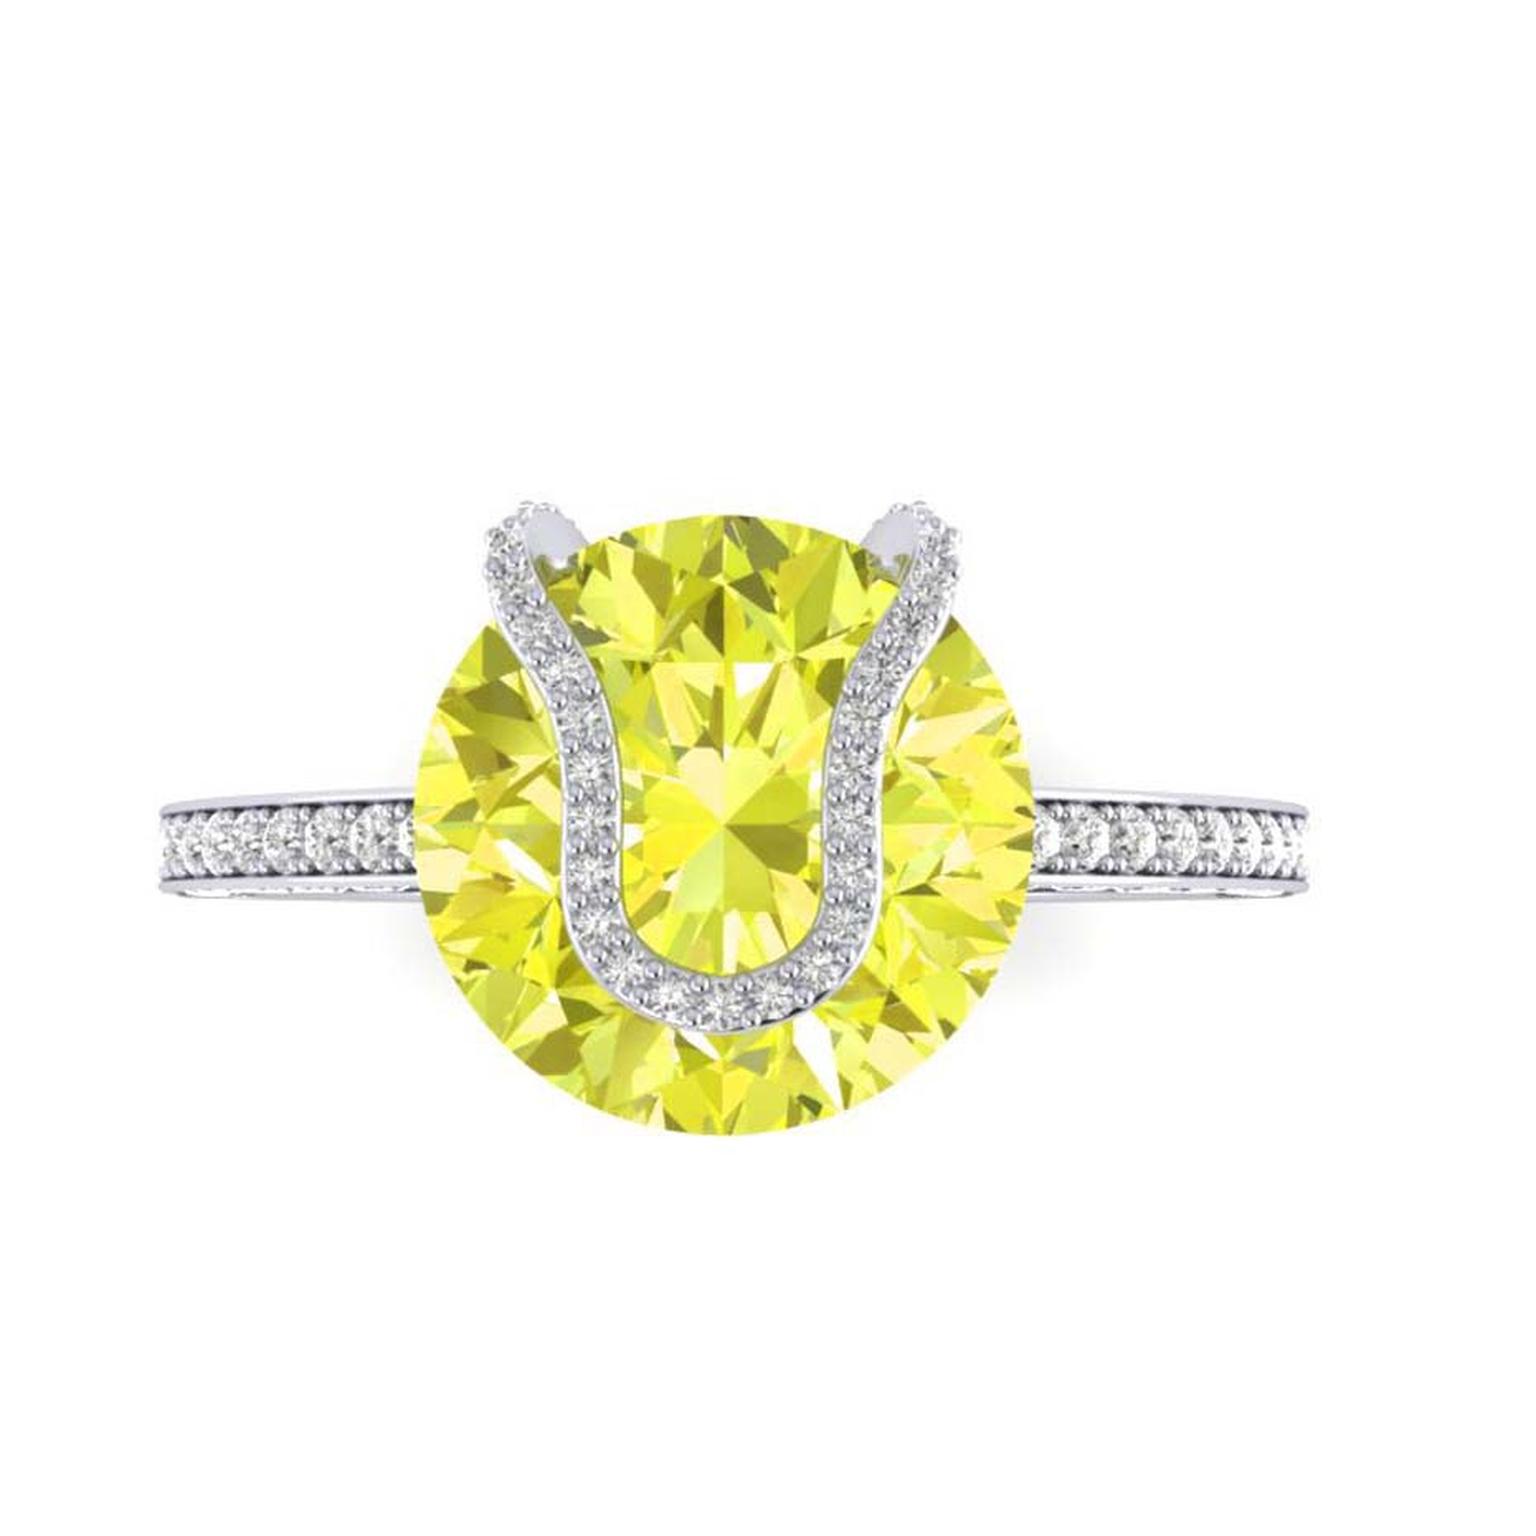 Game set and a perfect match with this striking Taylor and Hart yellow diamond engagement ring